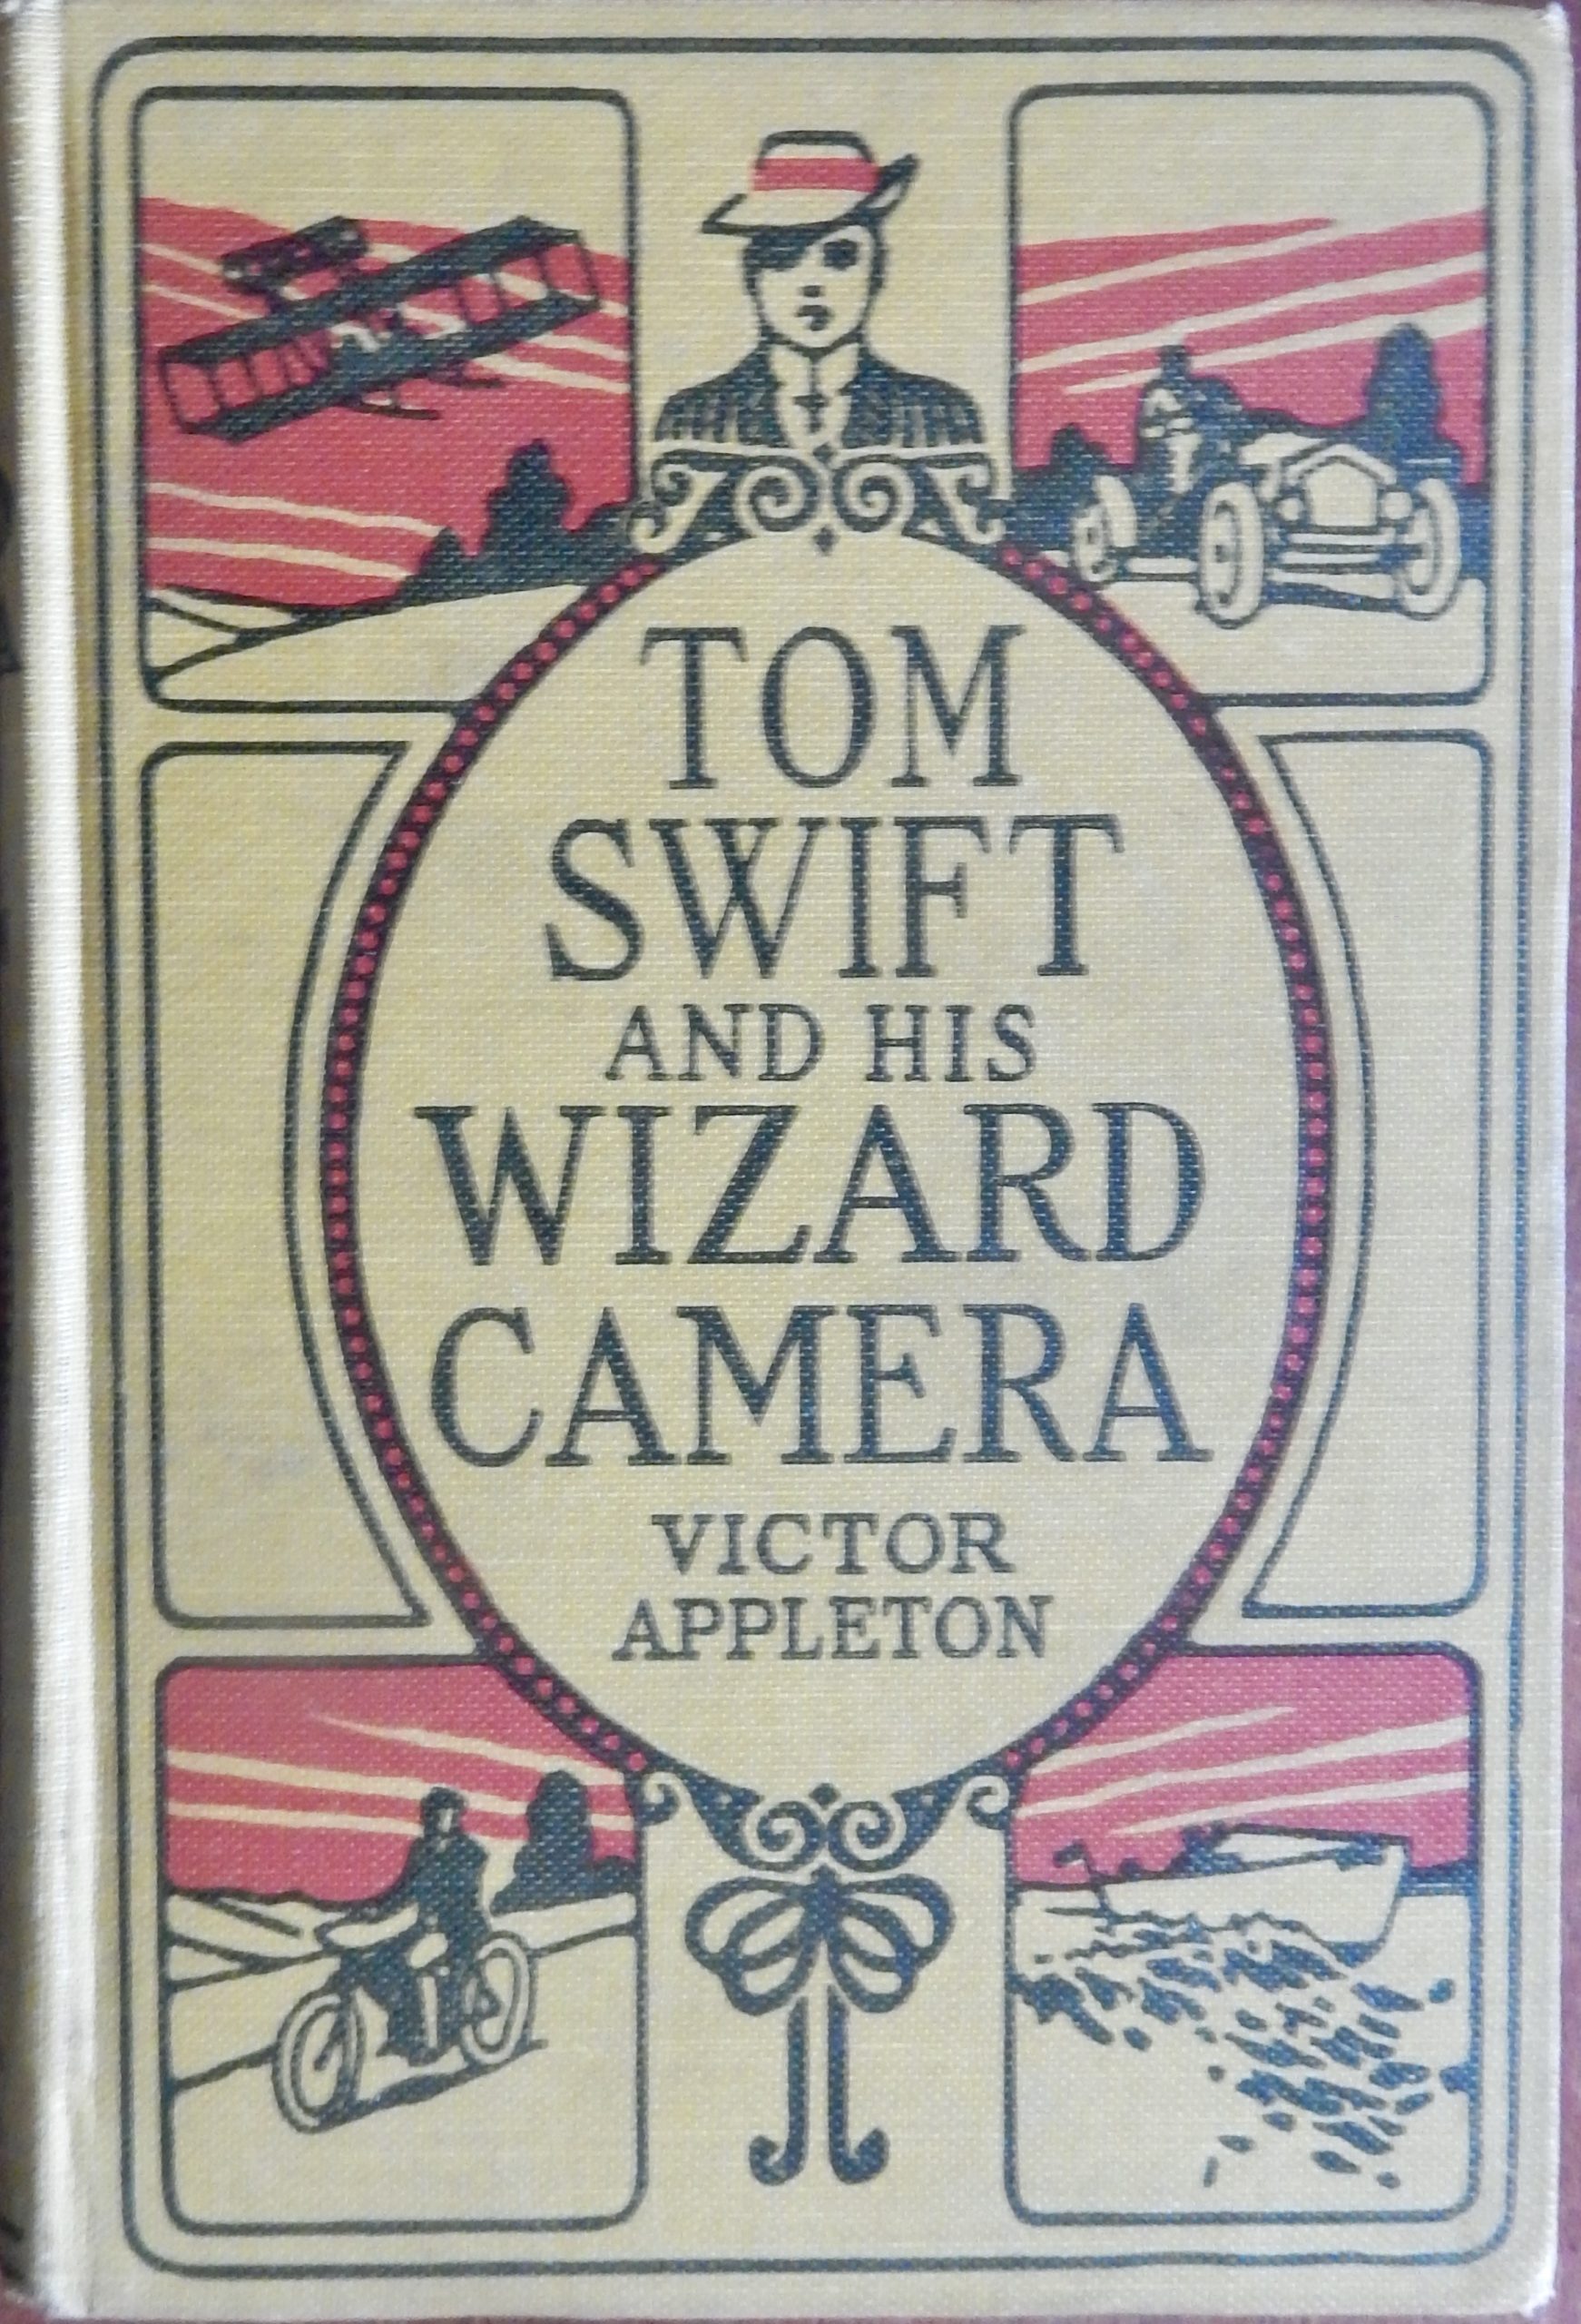 Tom Swift and His Wizard Camera book image